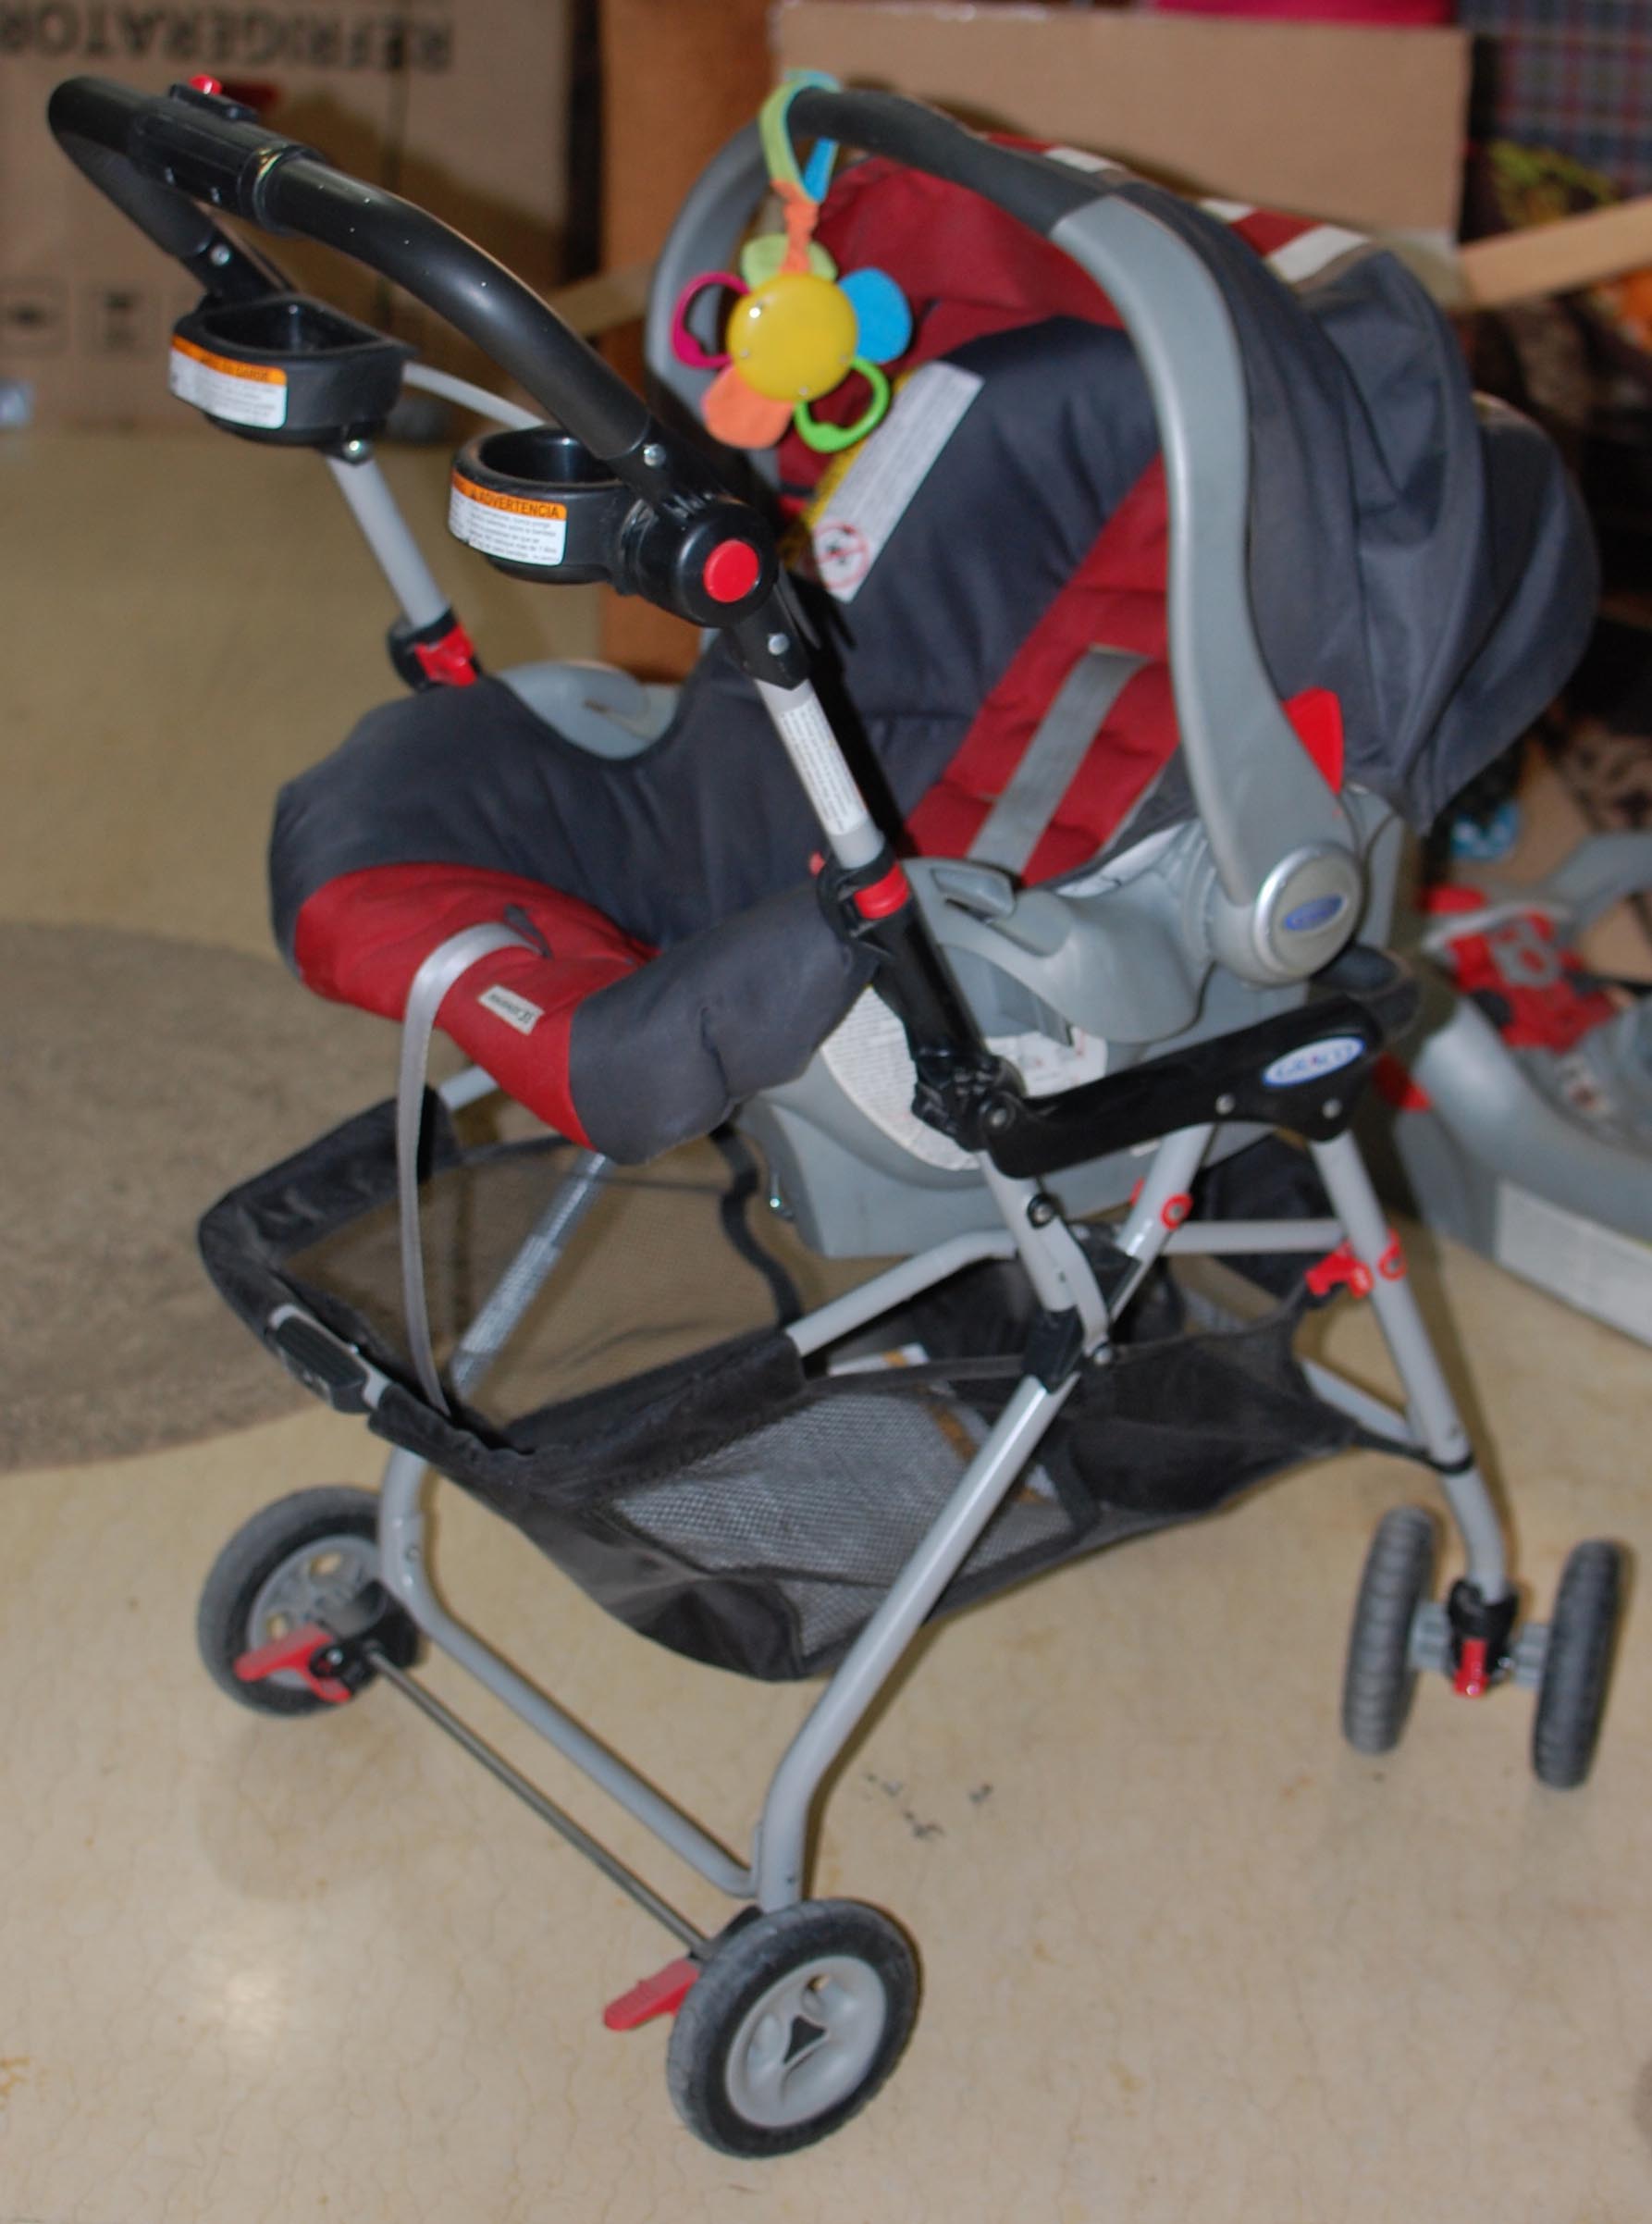 strollers that fit graco snugride 35